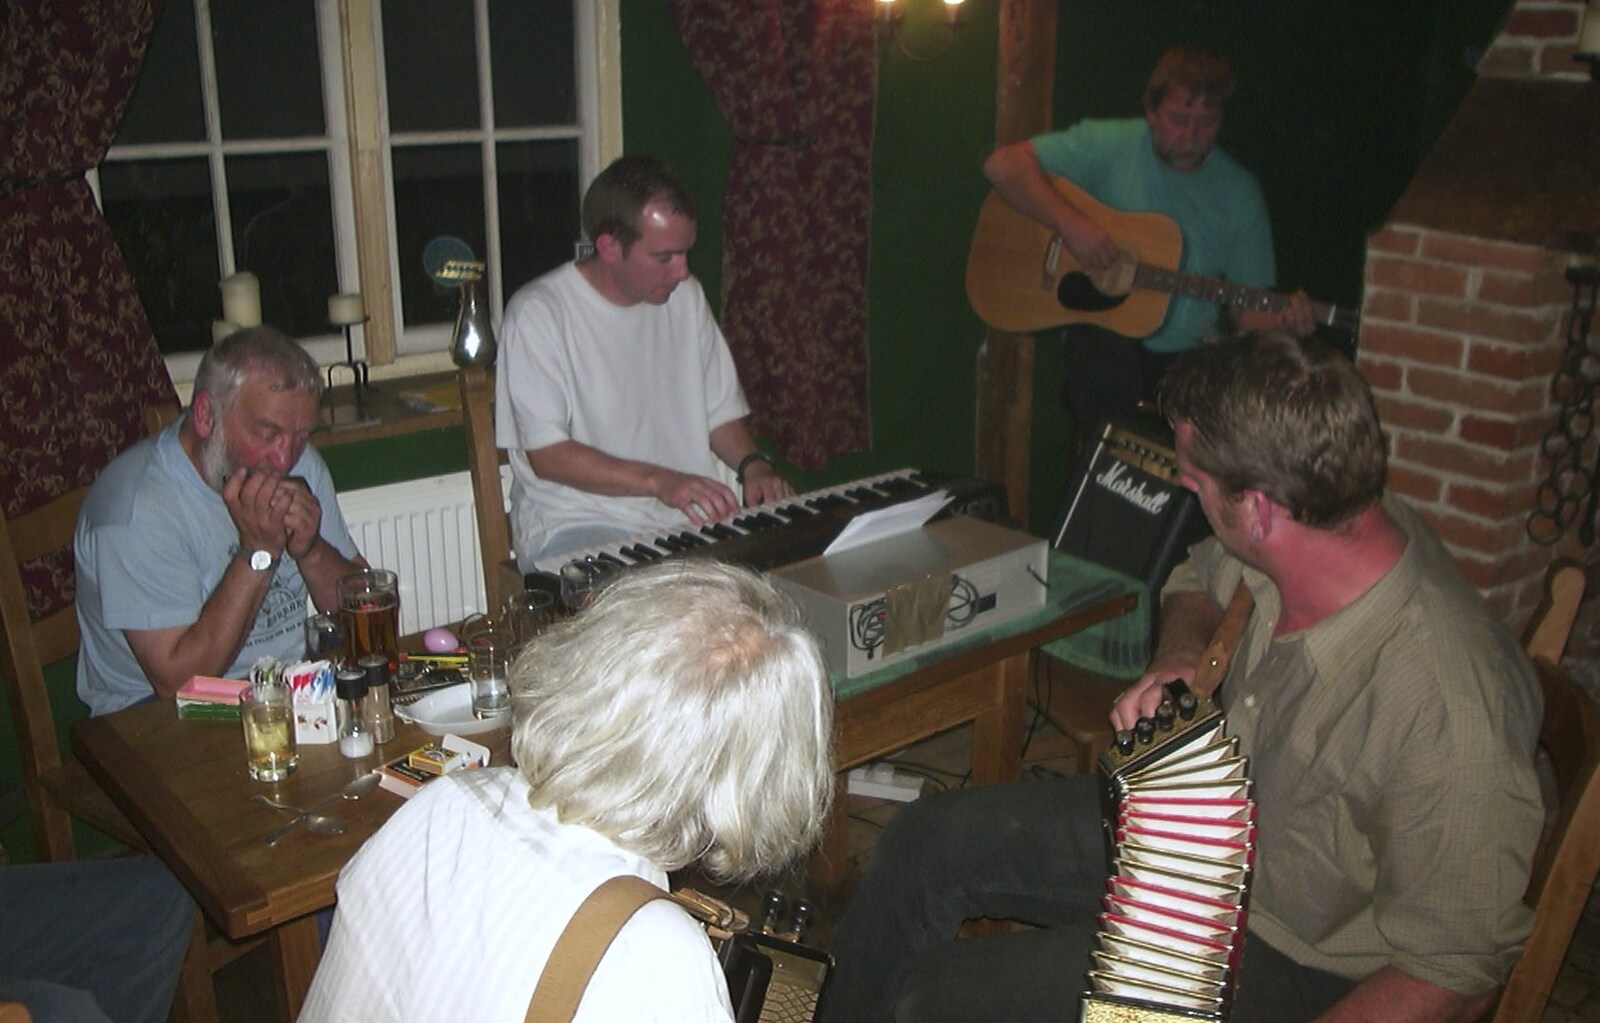 Folk night - with added keyboards from The BSCC at Laxfield and Hoxne, Suffolk - 2nd May 2002